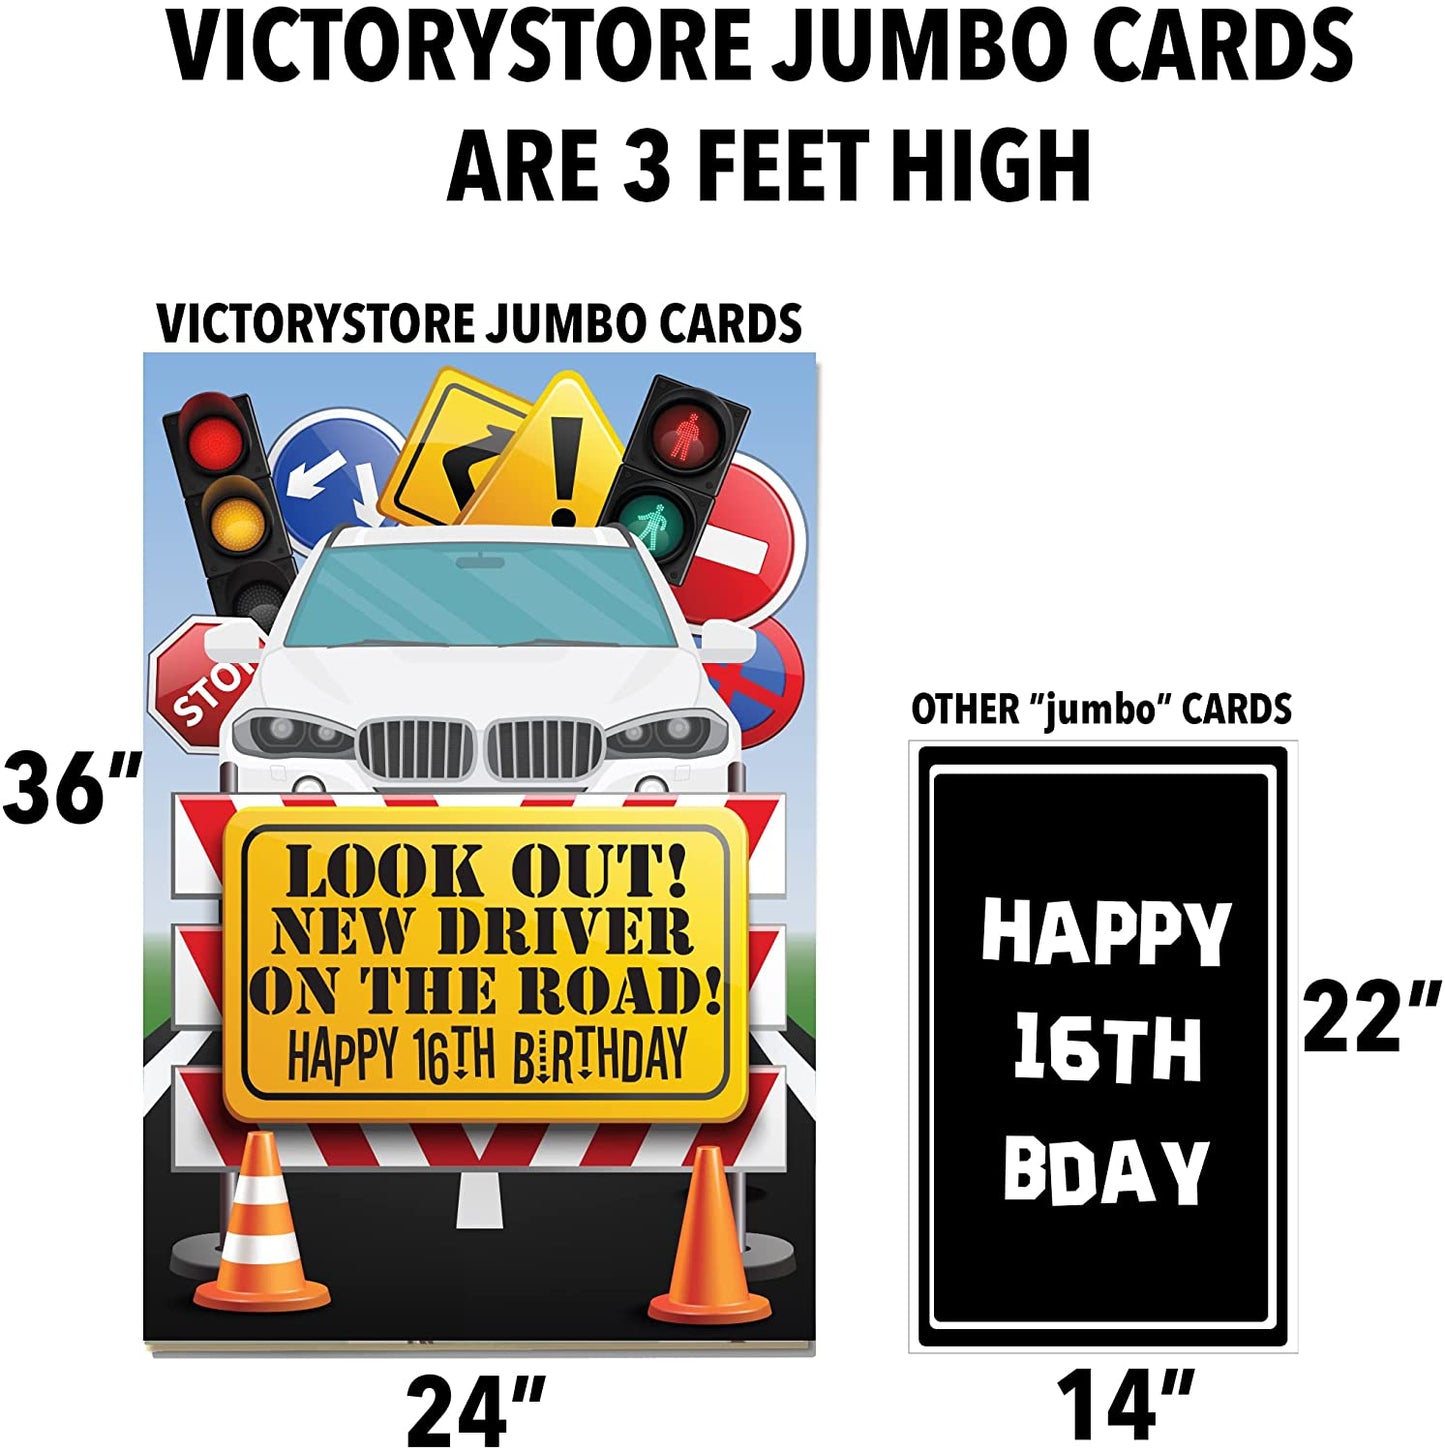 3' Jumbo Look Out New Driver On The Road 16th Birthday Card